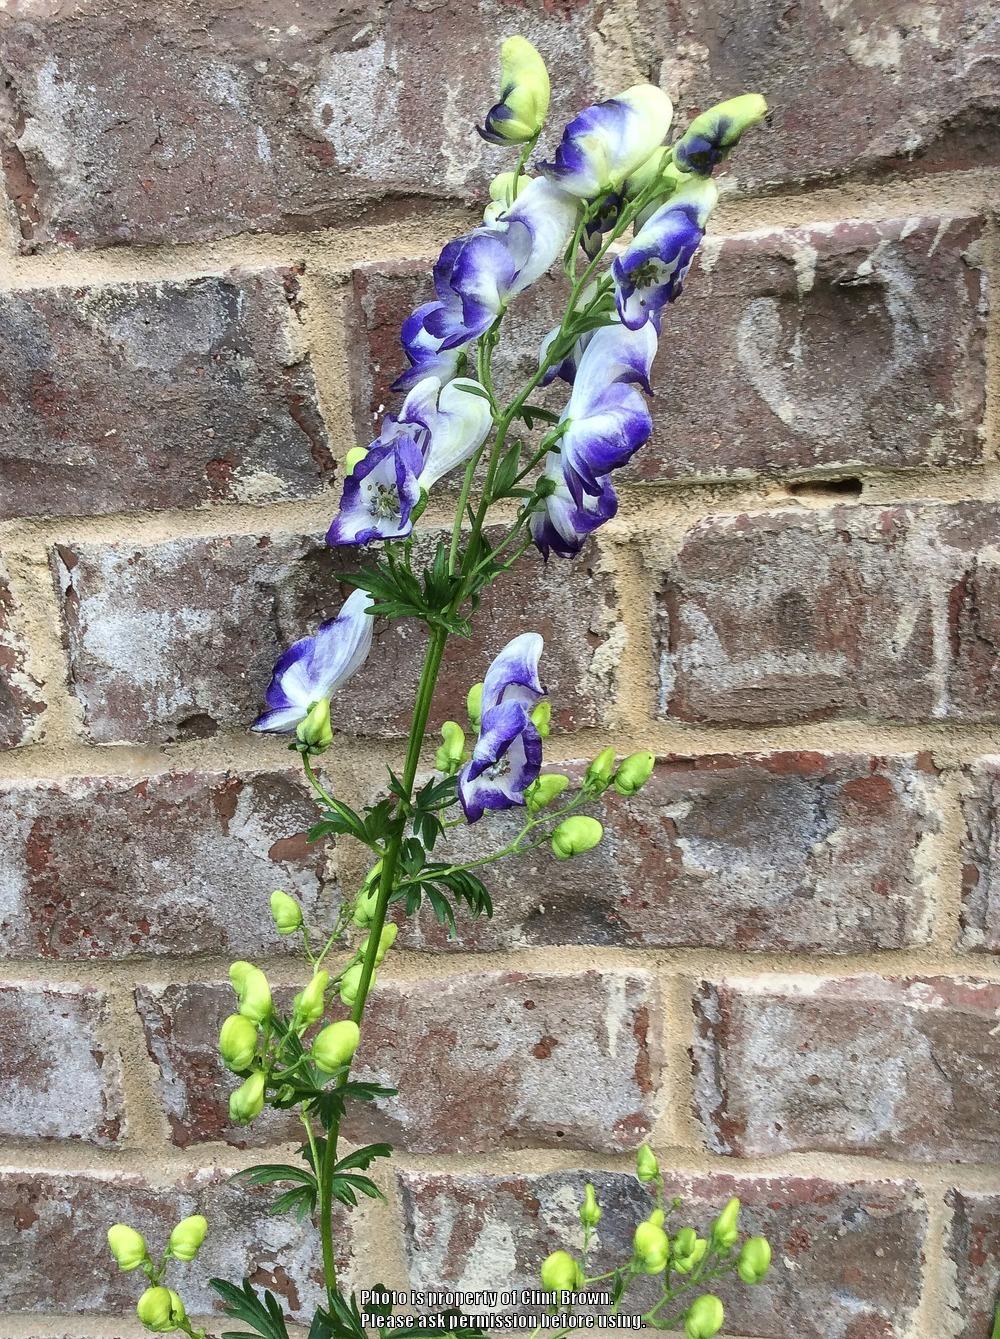 Photo of Monkshood (Aconitum x bicolor) uploaded by clintbrown